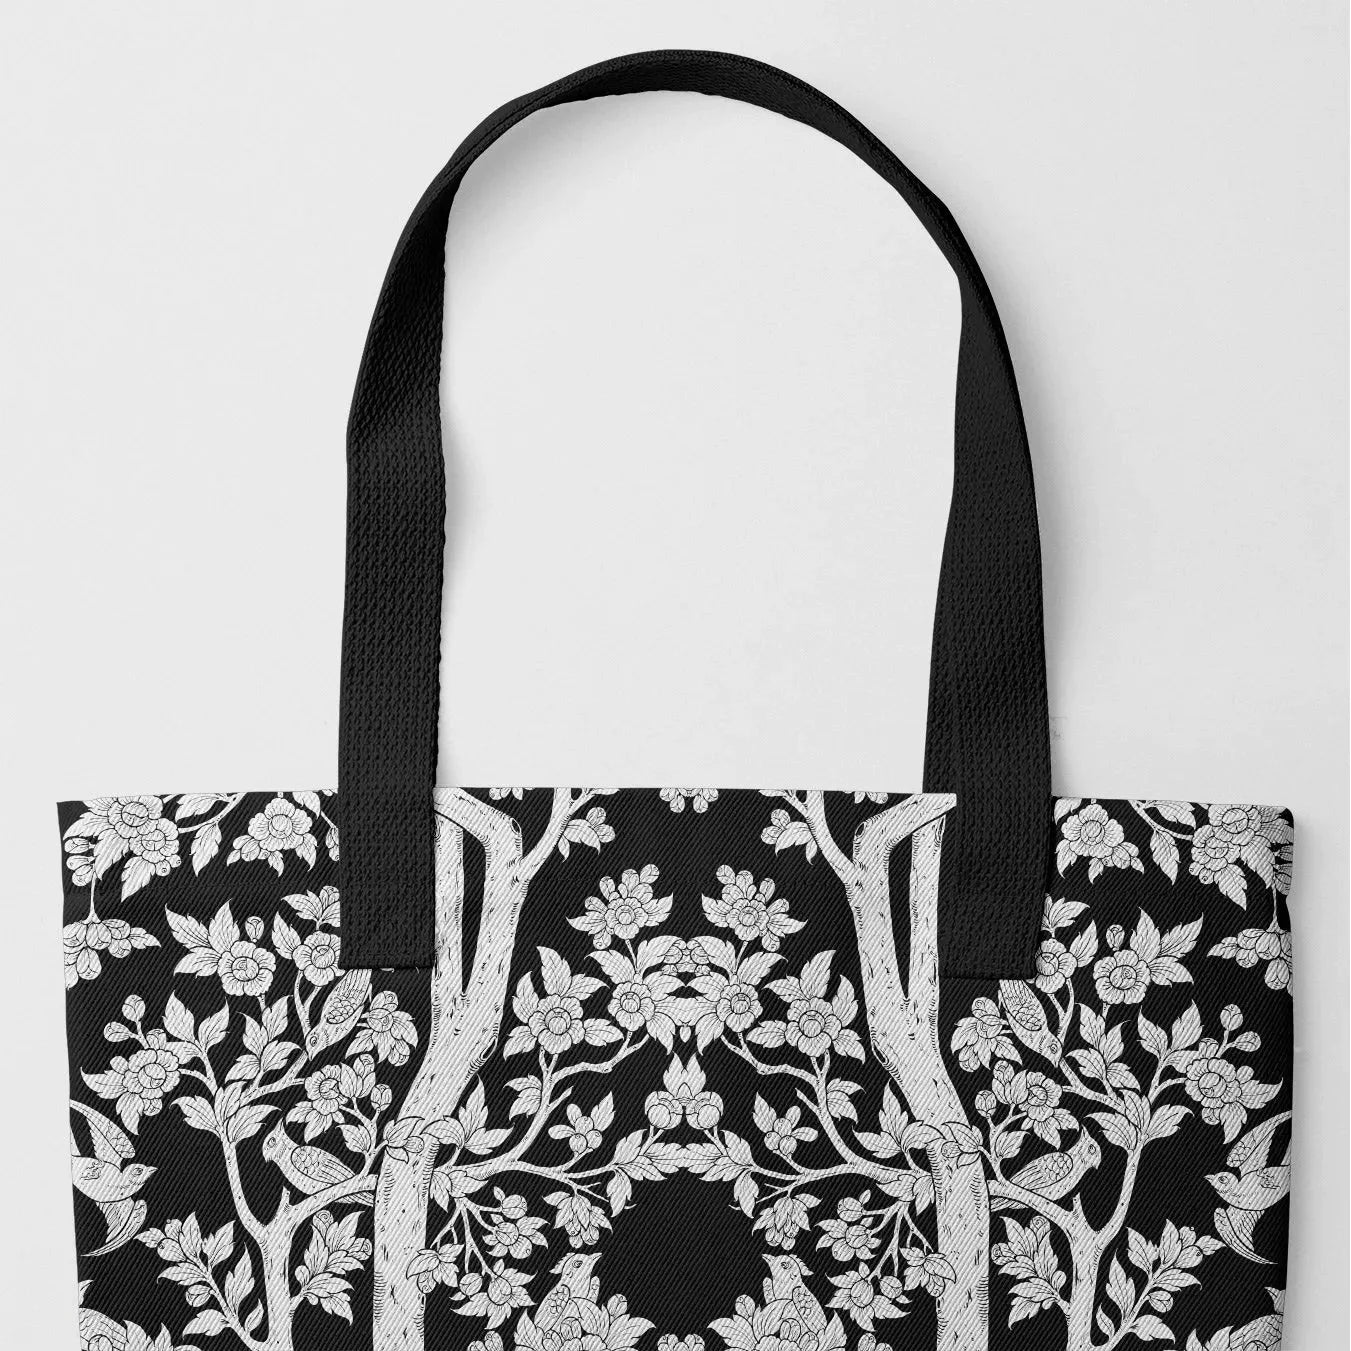 Aviary Tote - Raven - Heavy Duty Reusable Grocery Bag - Black Handles - Shopping Totes - Aesthetic Art